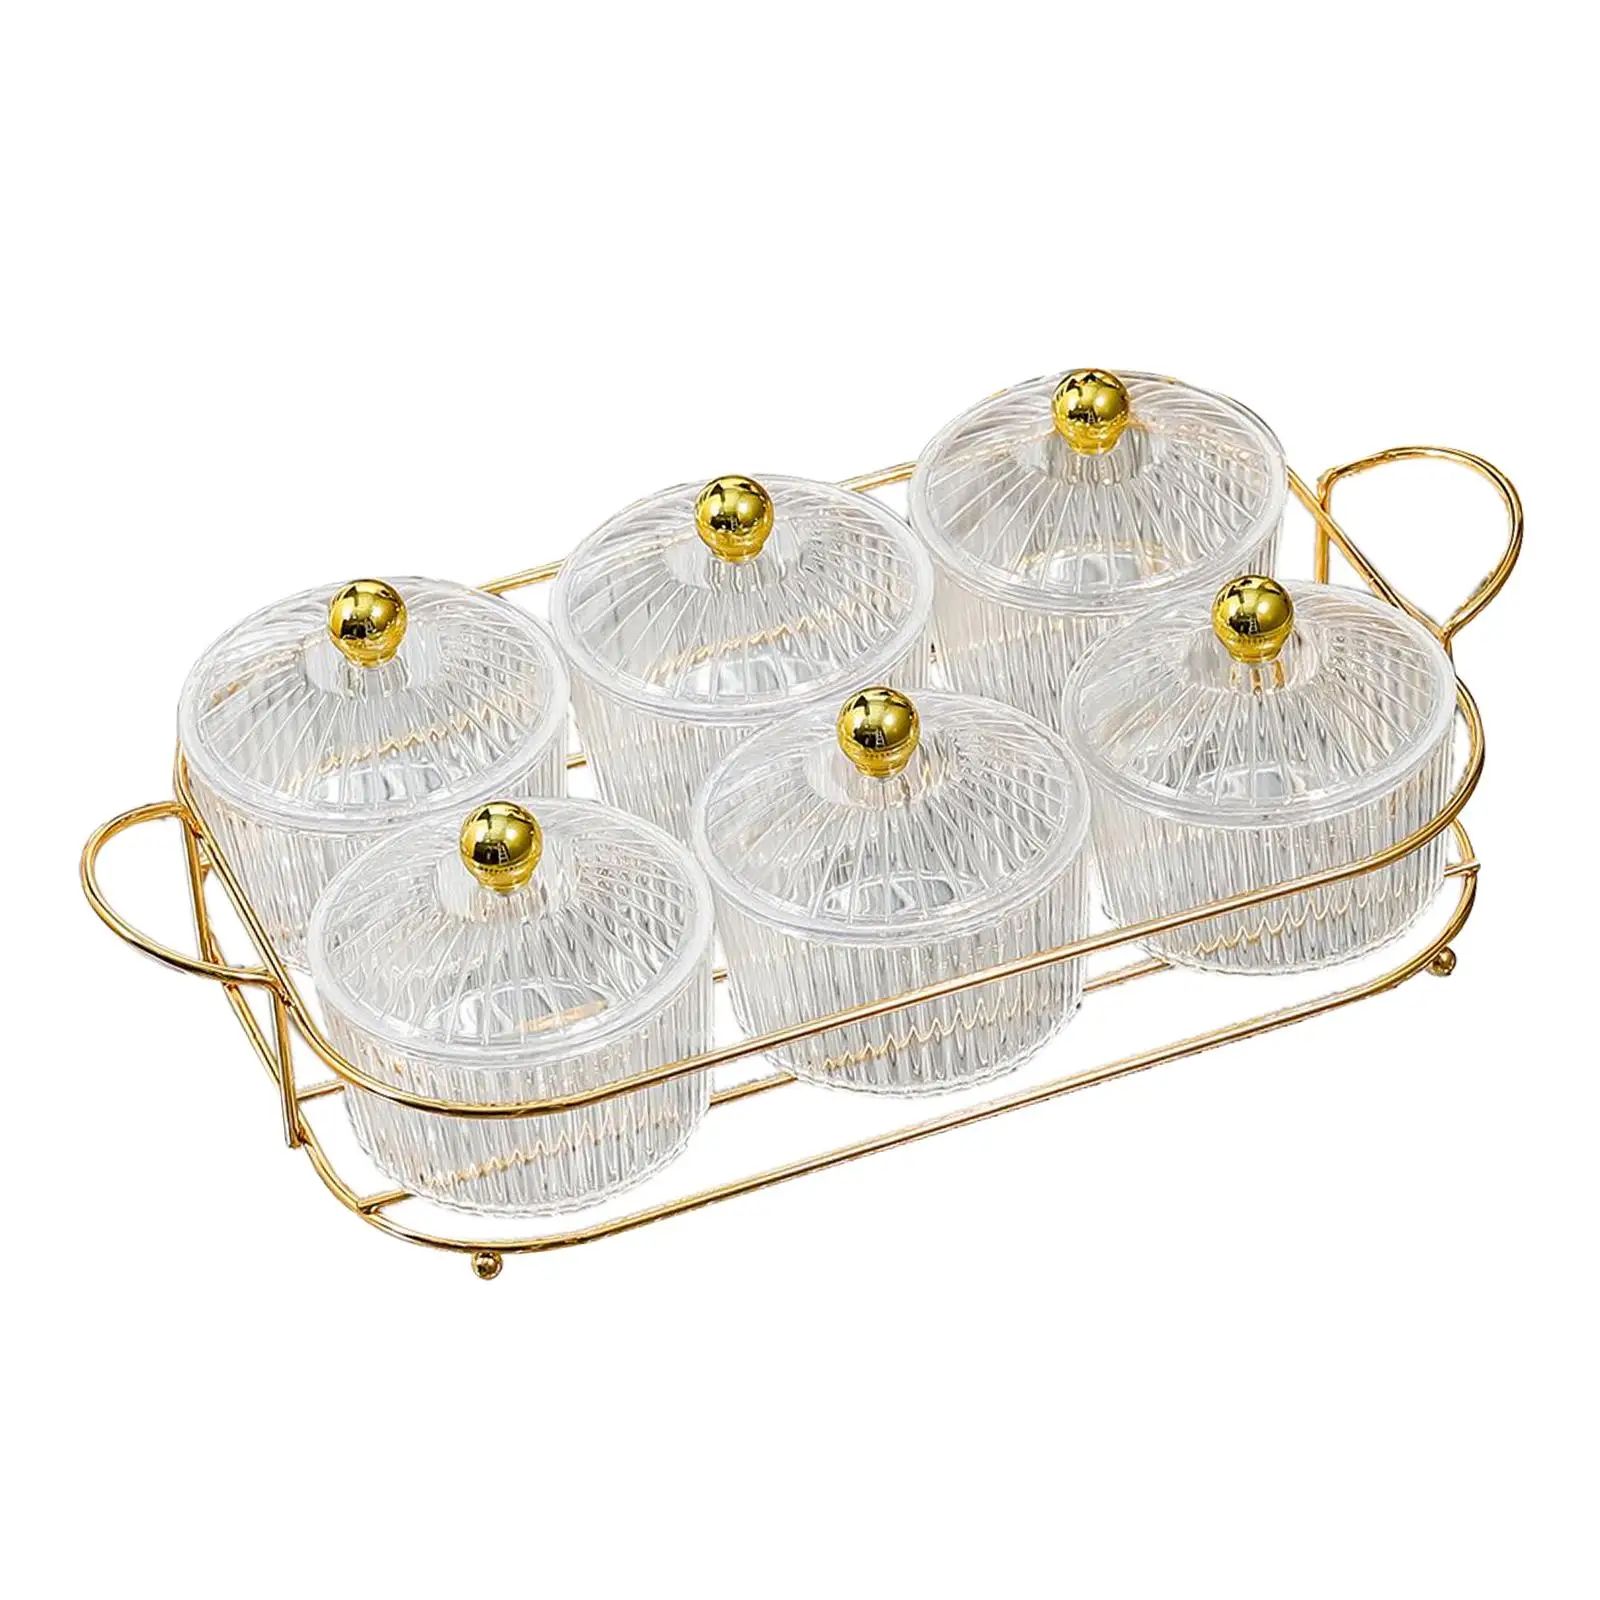 Light Luxury Appetizer Tray Decor Condiment Tray Organizer Snack Serving Tray for Nut